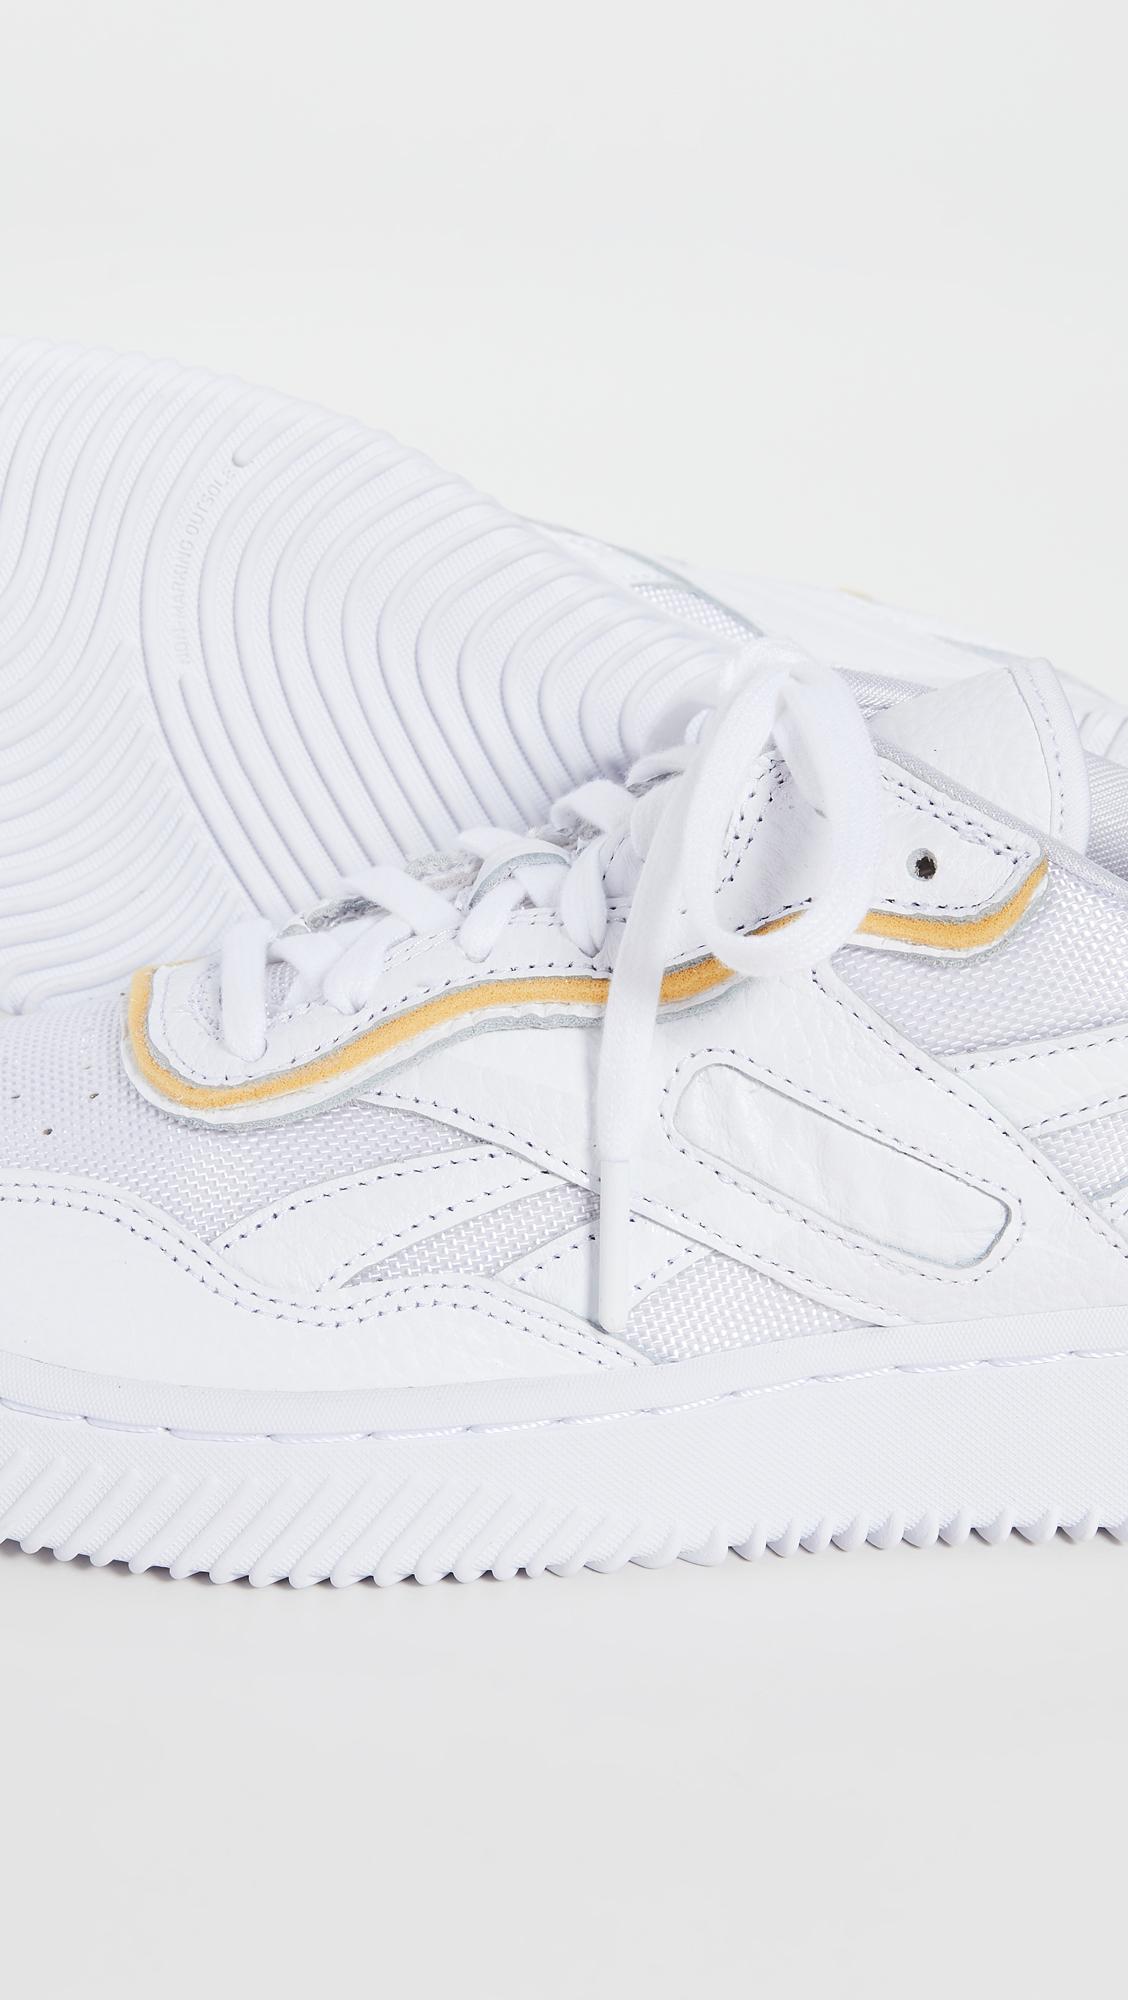 Reebok X Victoria Beckham Leather Dual Court Ii Vb Sneakers in White | Lyst